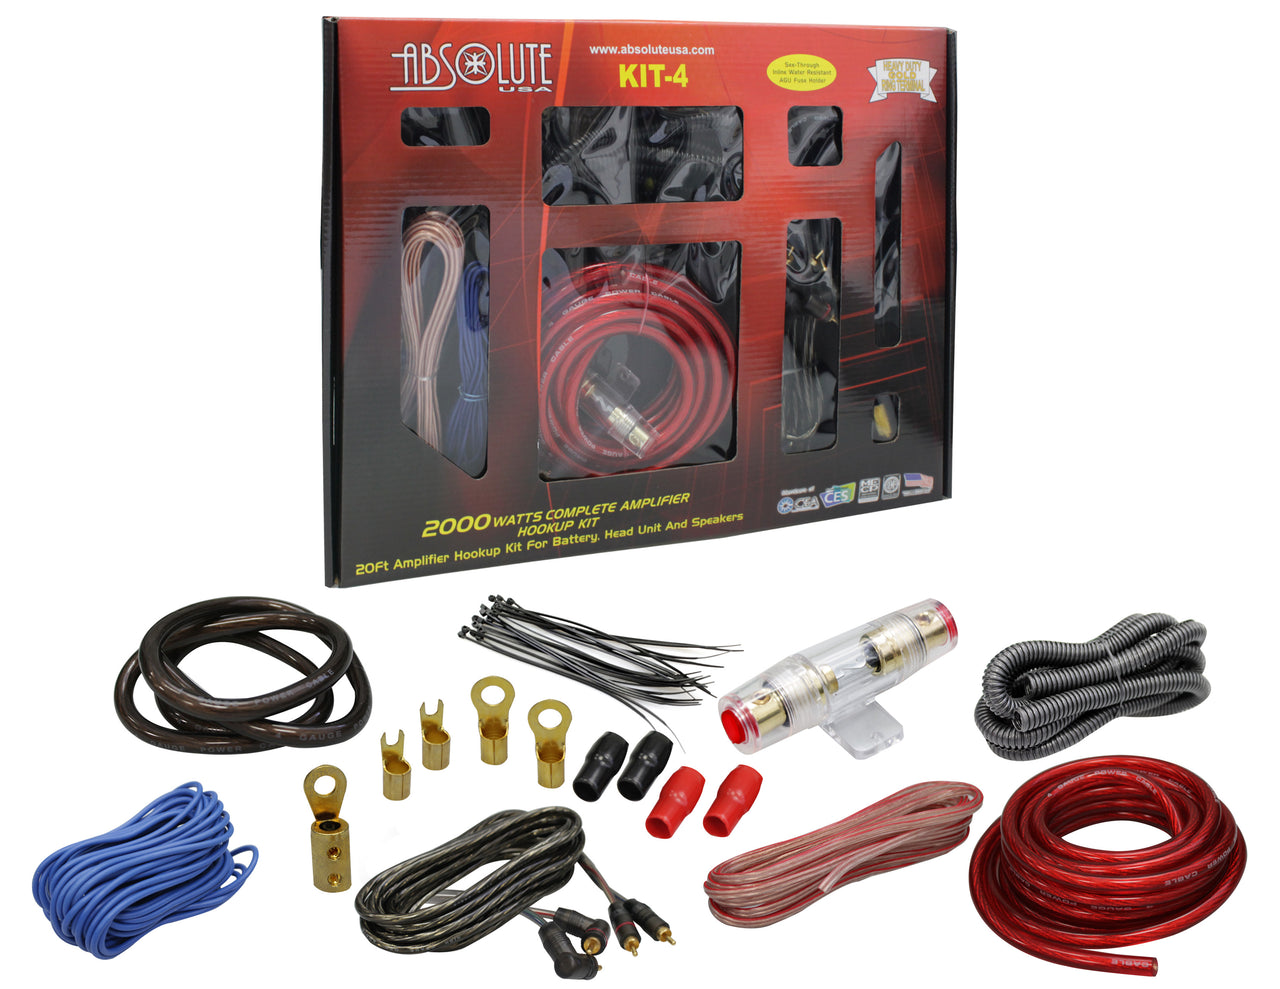 Absolute 2000W KIT-4 Gauge Amp Kit Amplifier Install Wiring Complete 4 Ga Car Wires Red